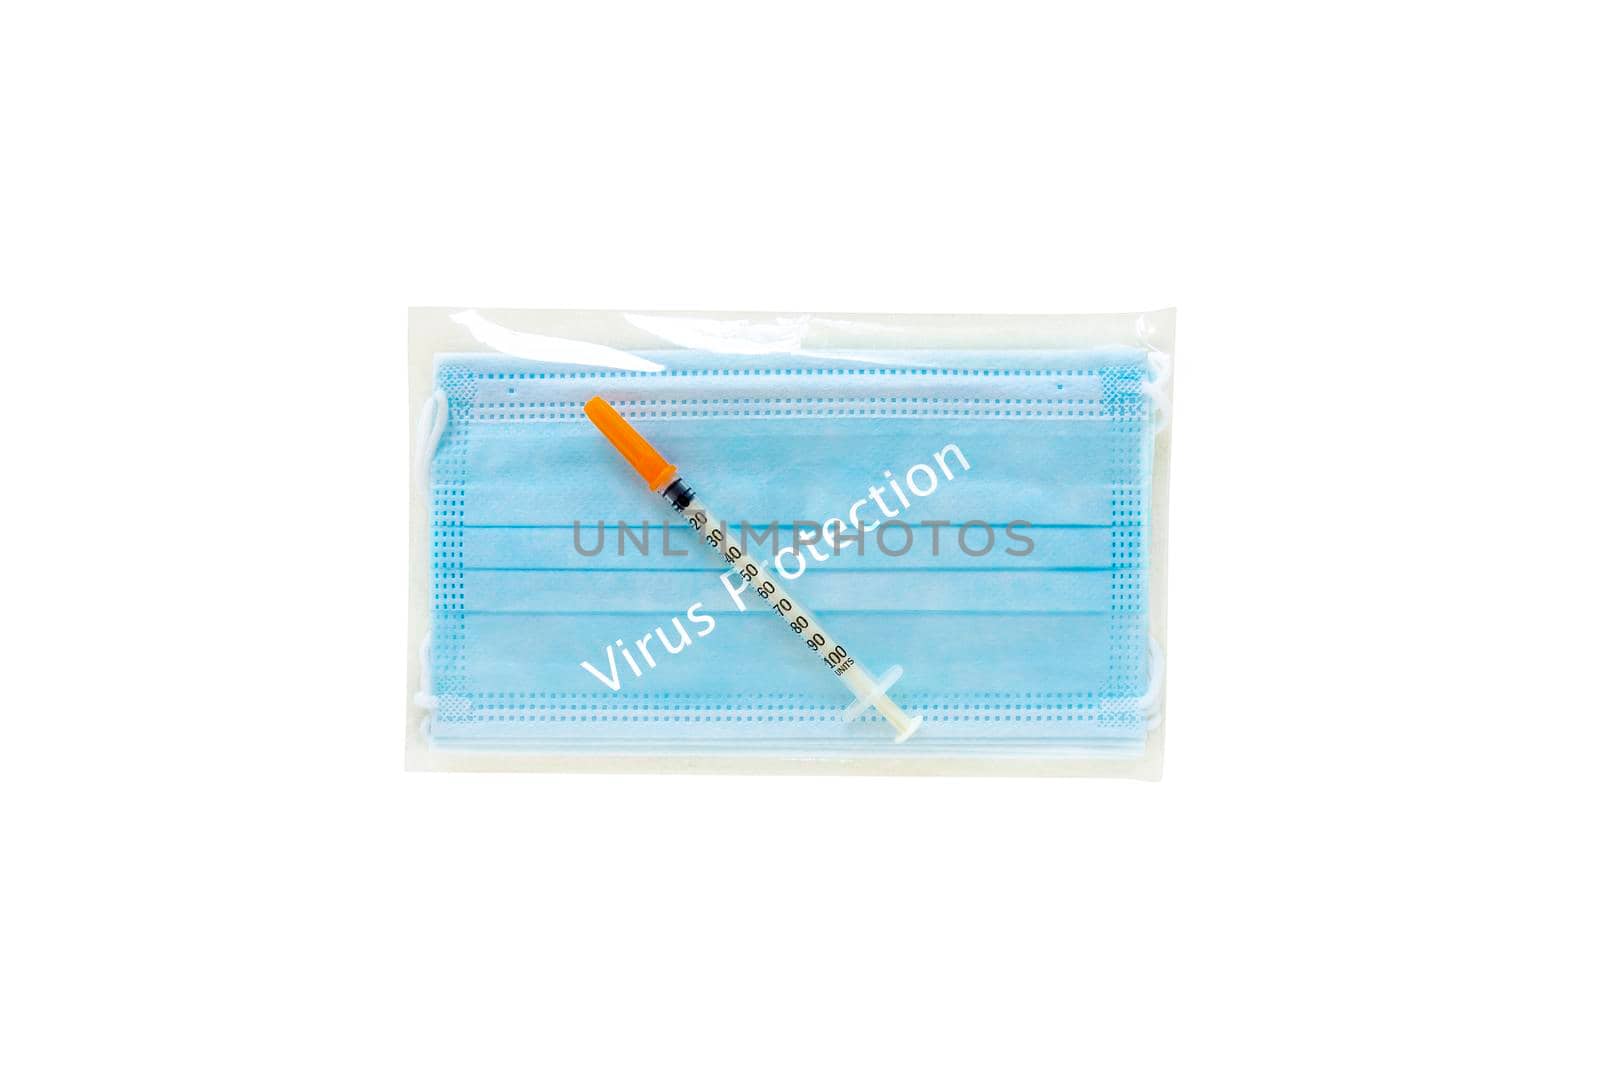 Face mask blue Virus Protection with sling Medical protective cover the mouth and nose isolated on white background with clipping path. by yodsawai